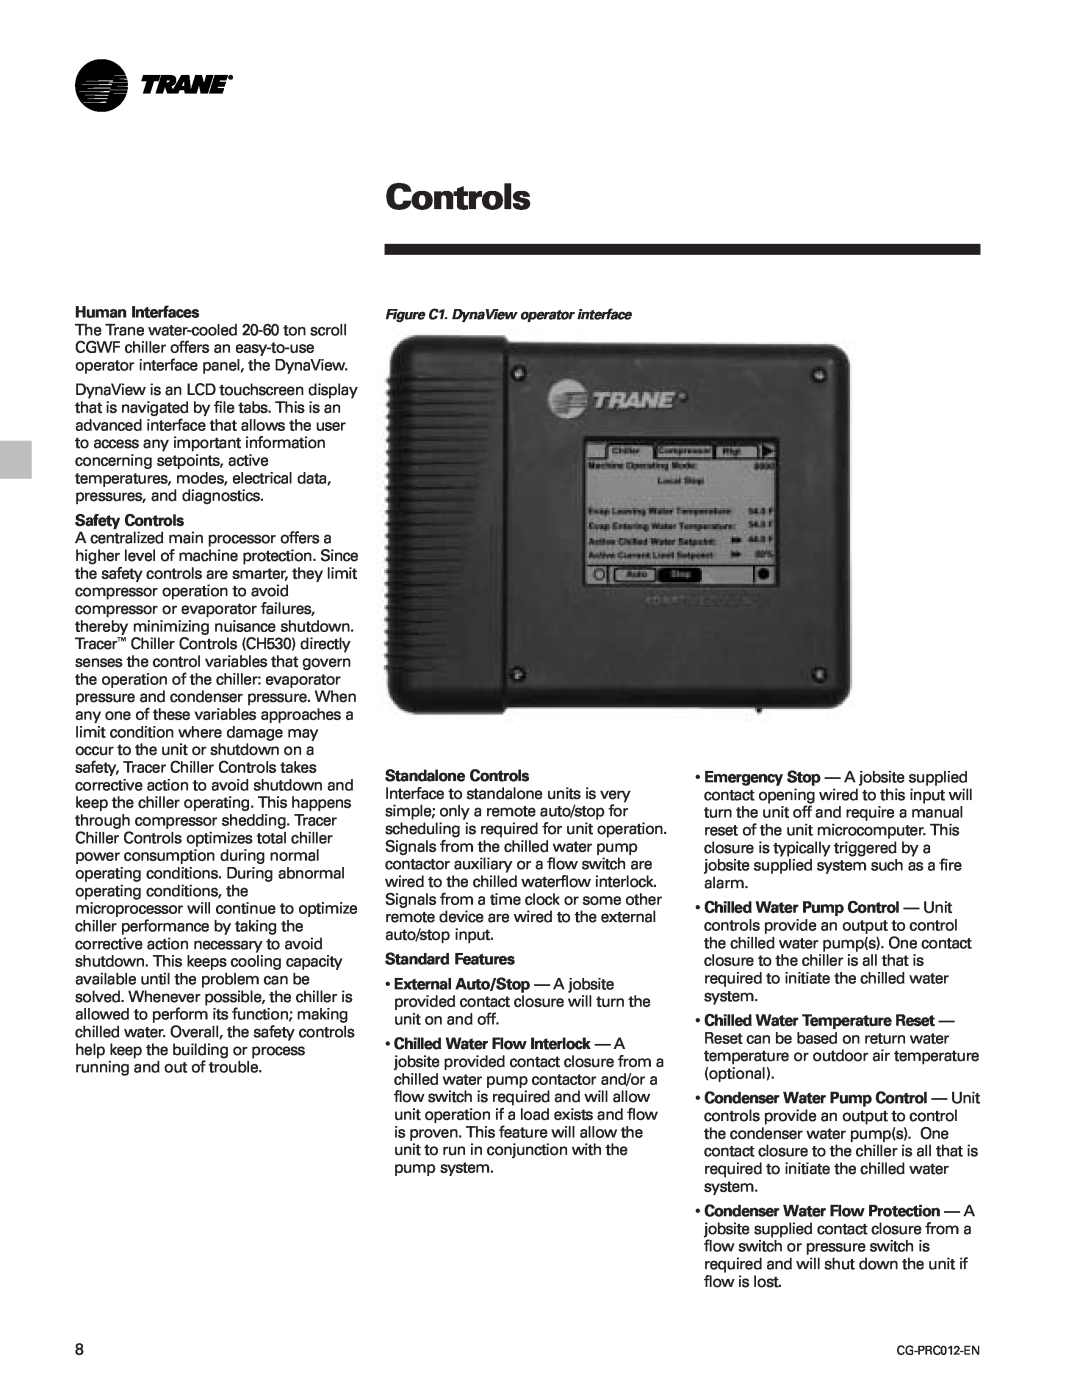 Trane CGWF, CCAF manual Human Interfaces, Safety Controls, Standalone Controls, Standard Features 